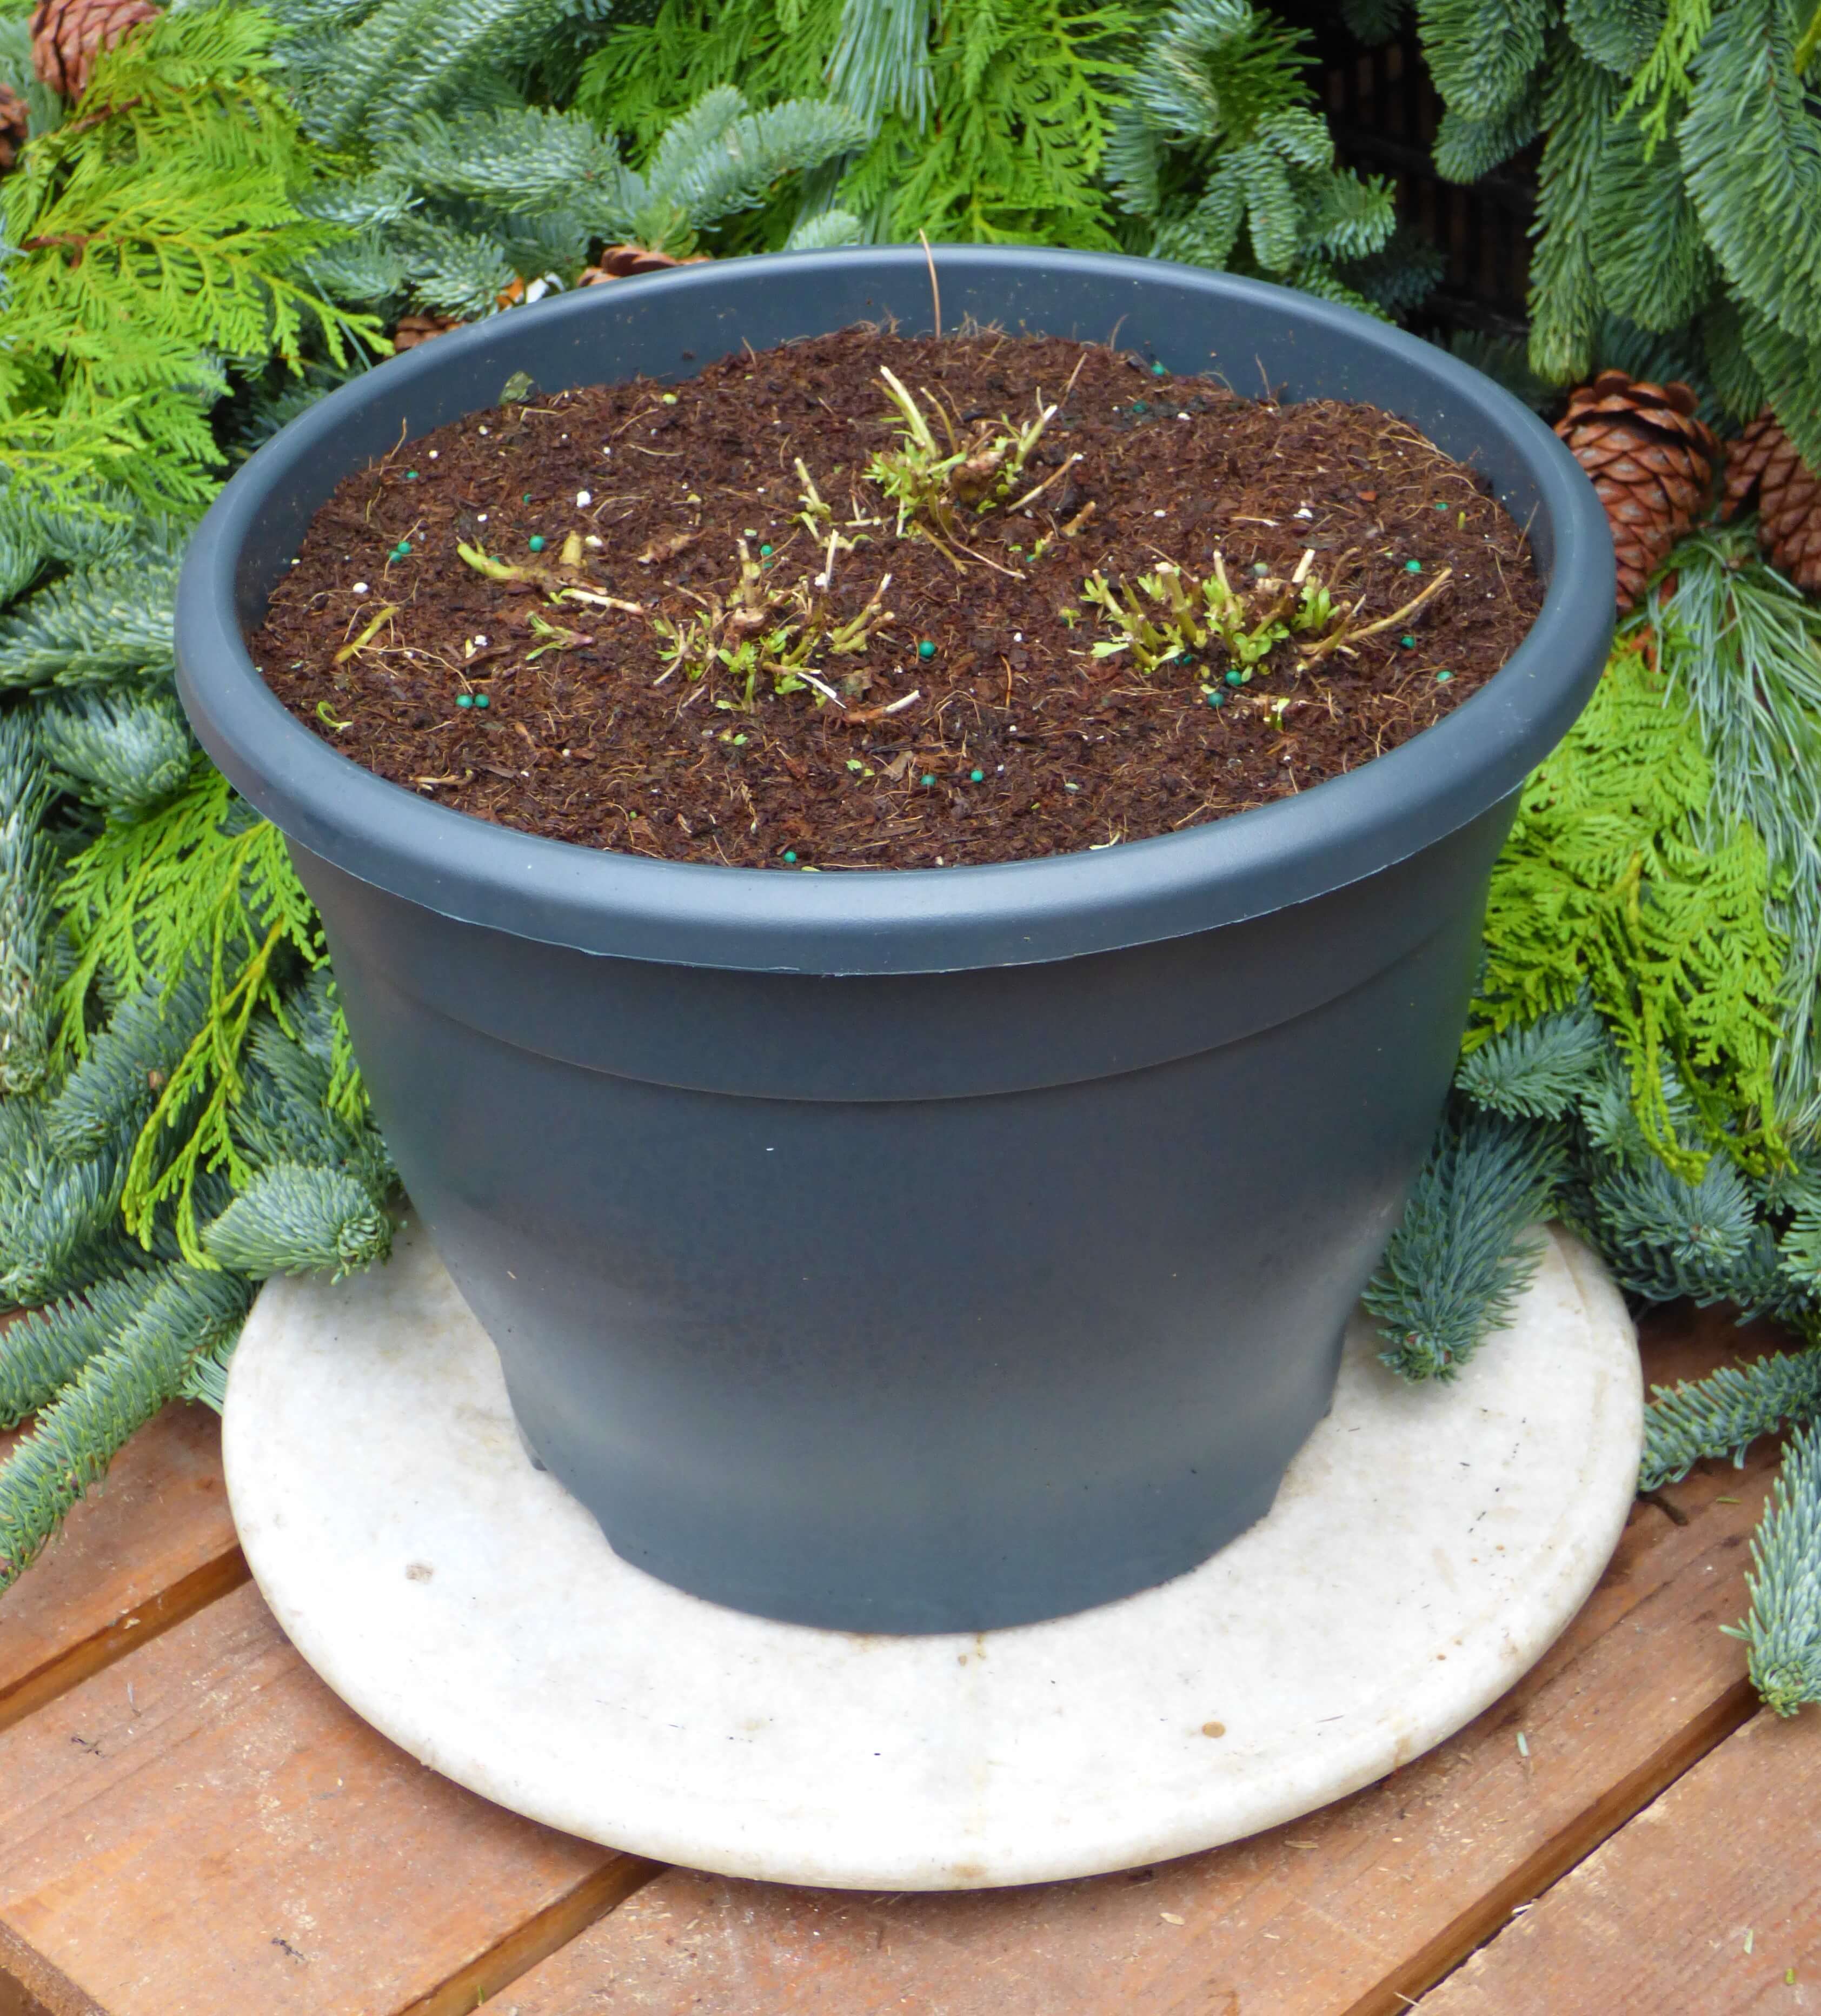 Pot with just soil inside